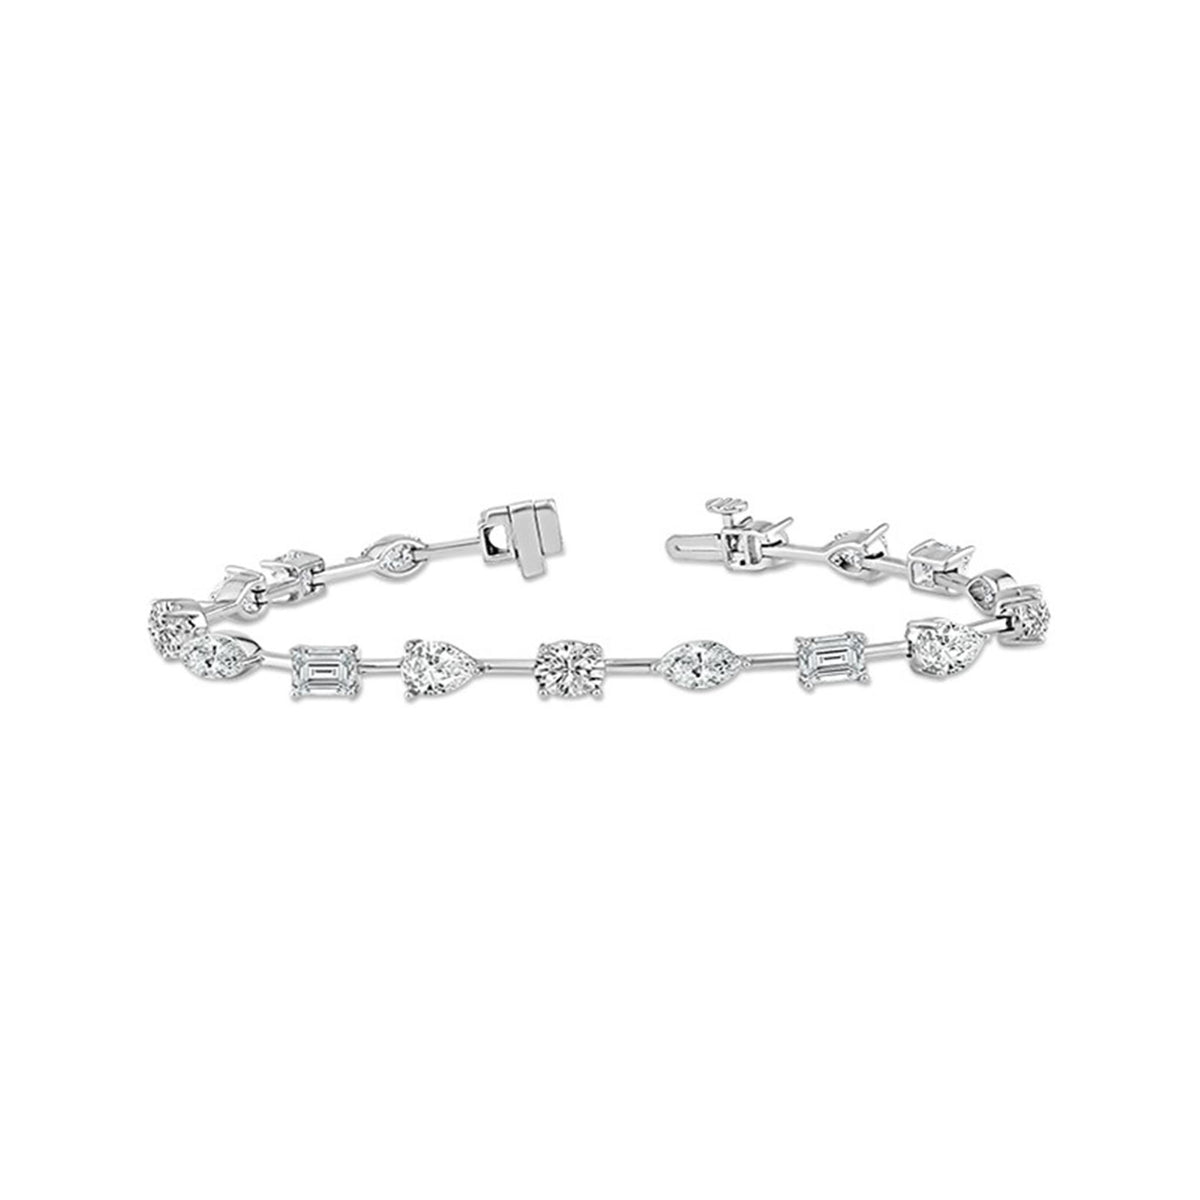 14Kt White Gold Bracelet With 7.75cttw Natural Diamonds